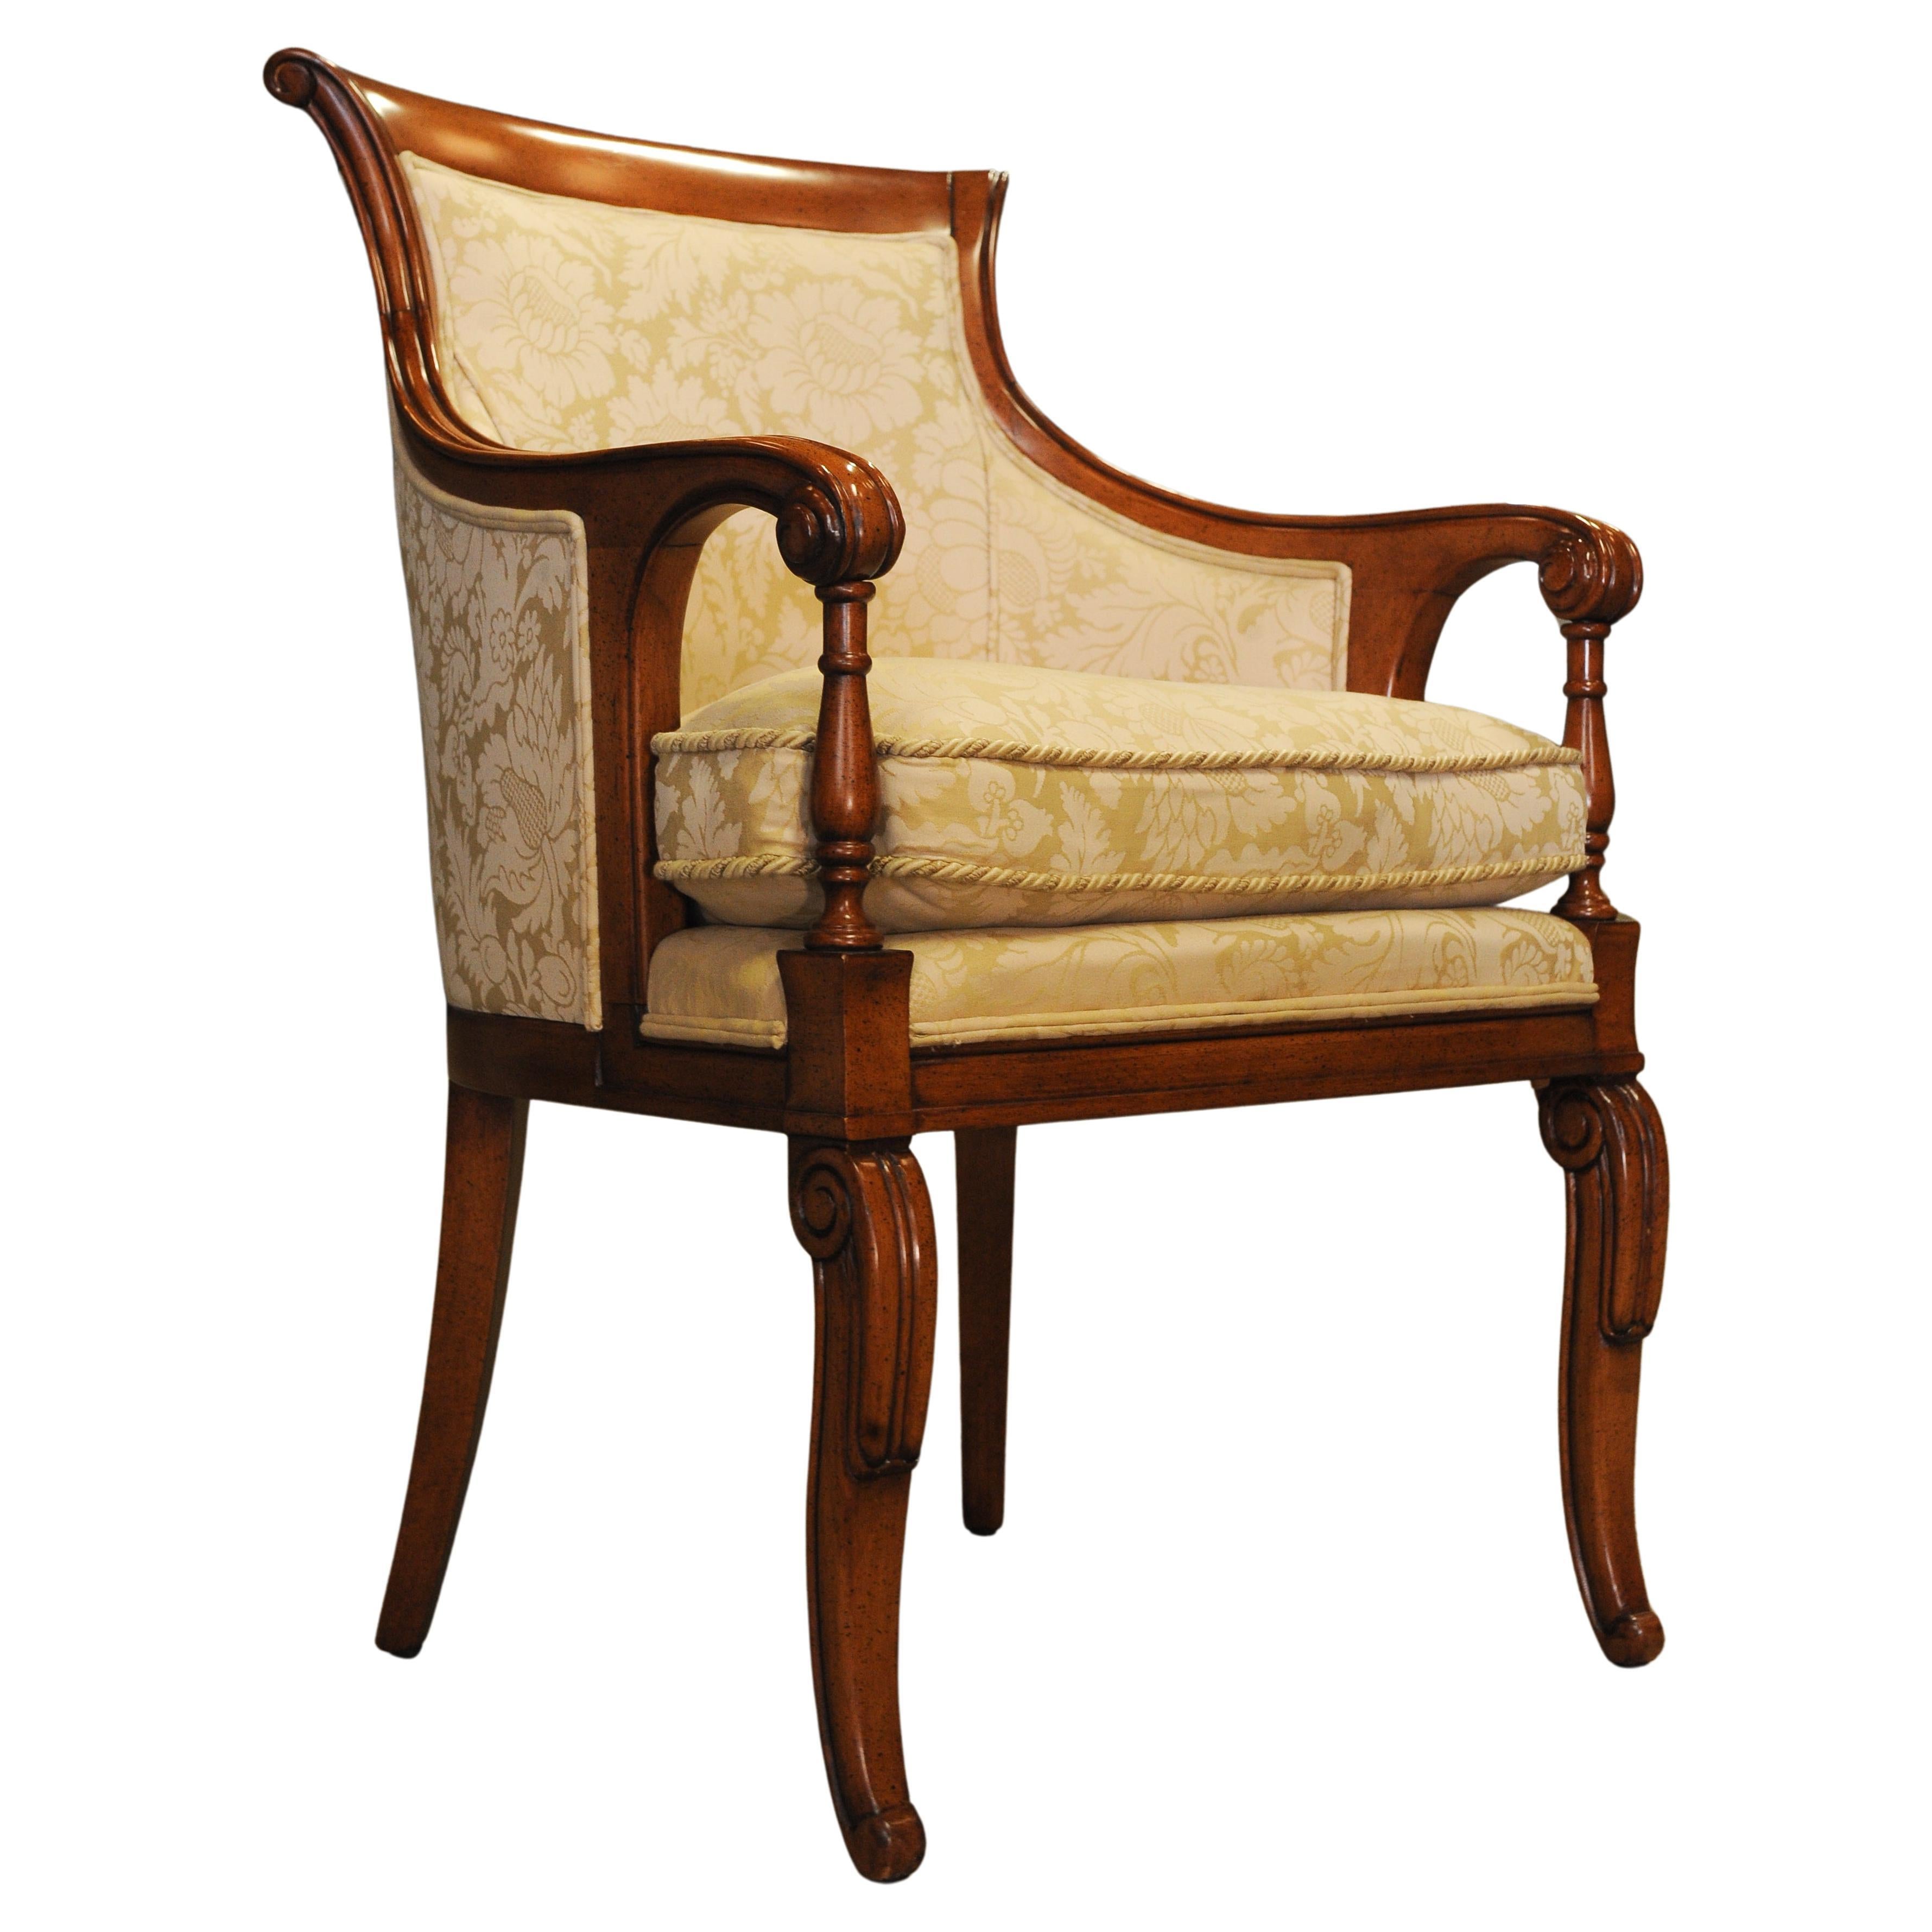 20th Century Elegant Pair of William IV Design Bergere Armchairs With Cream Damask Upholstery For Sale